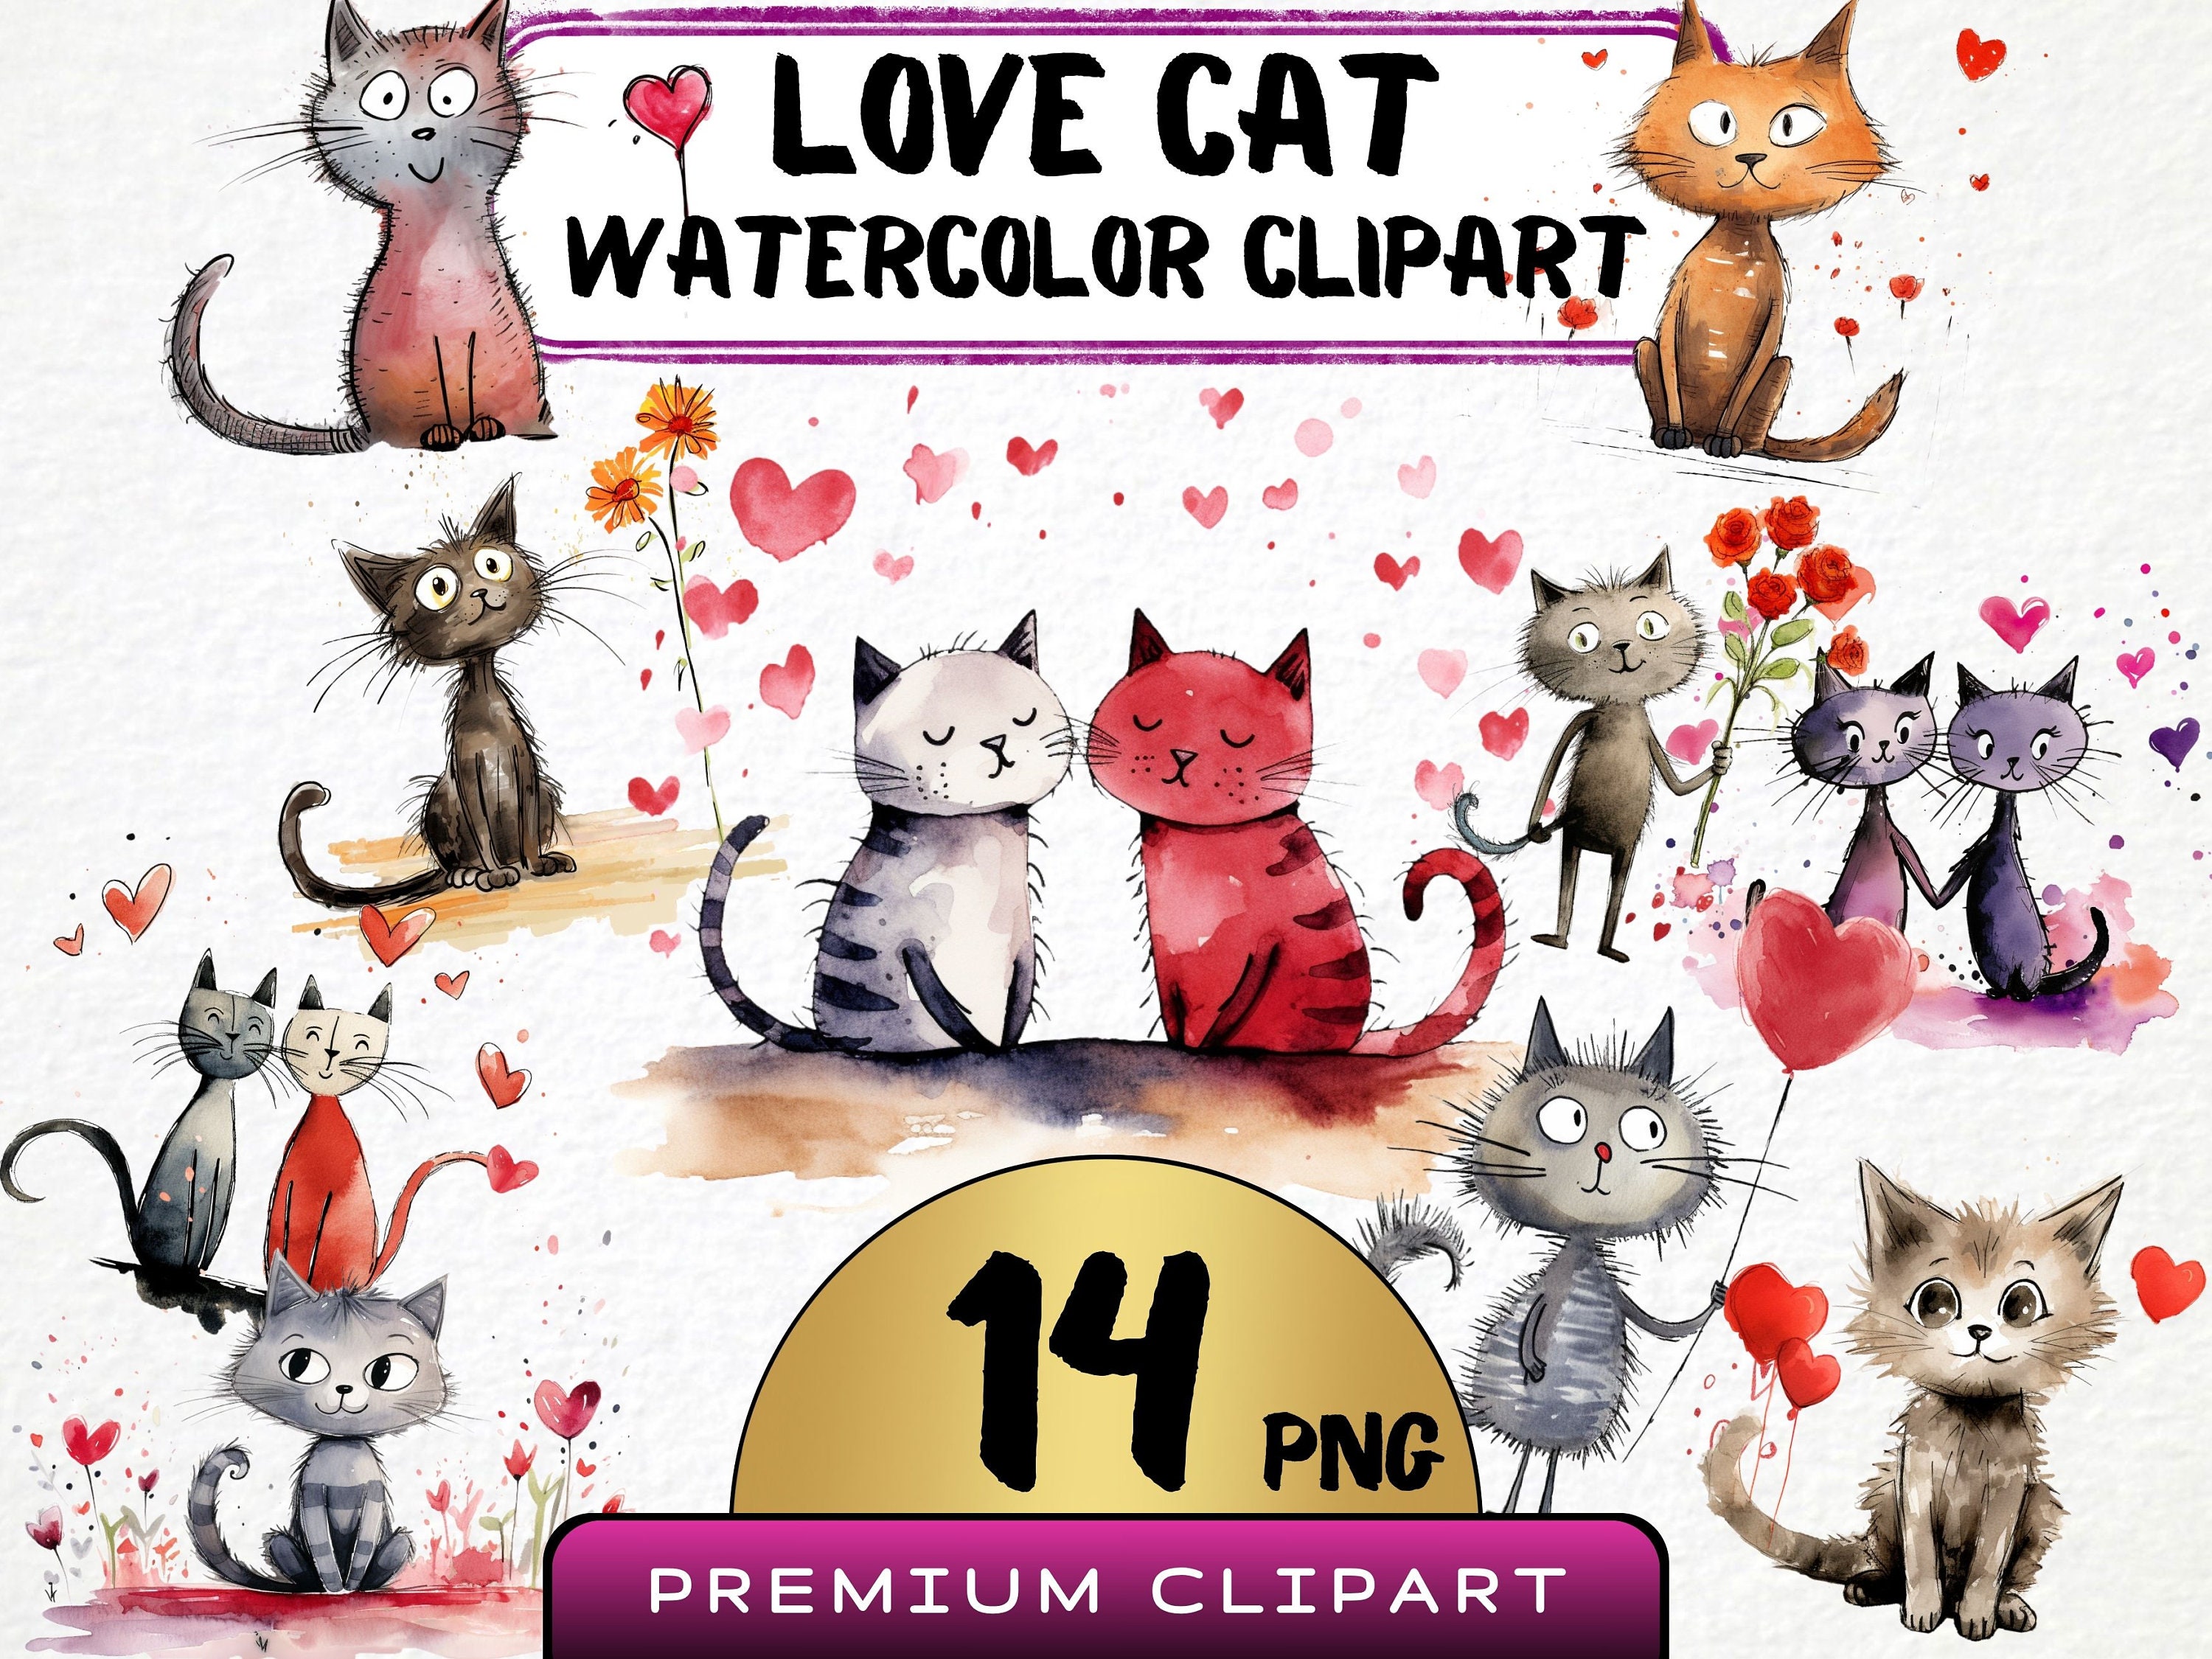 JoyCat Paint with Water Coloring Books for and 50 similar items